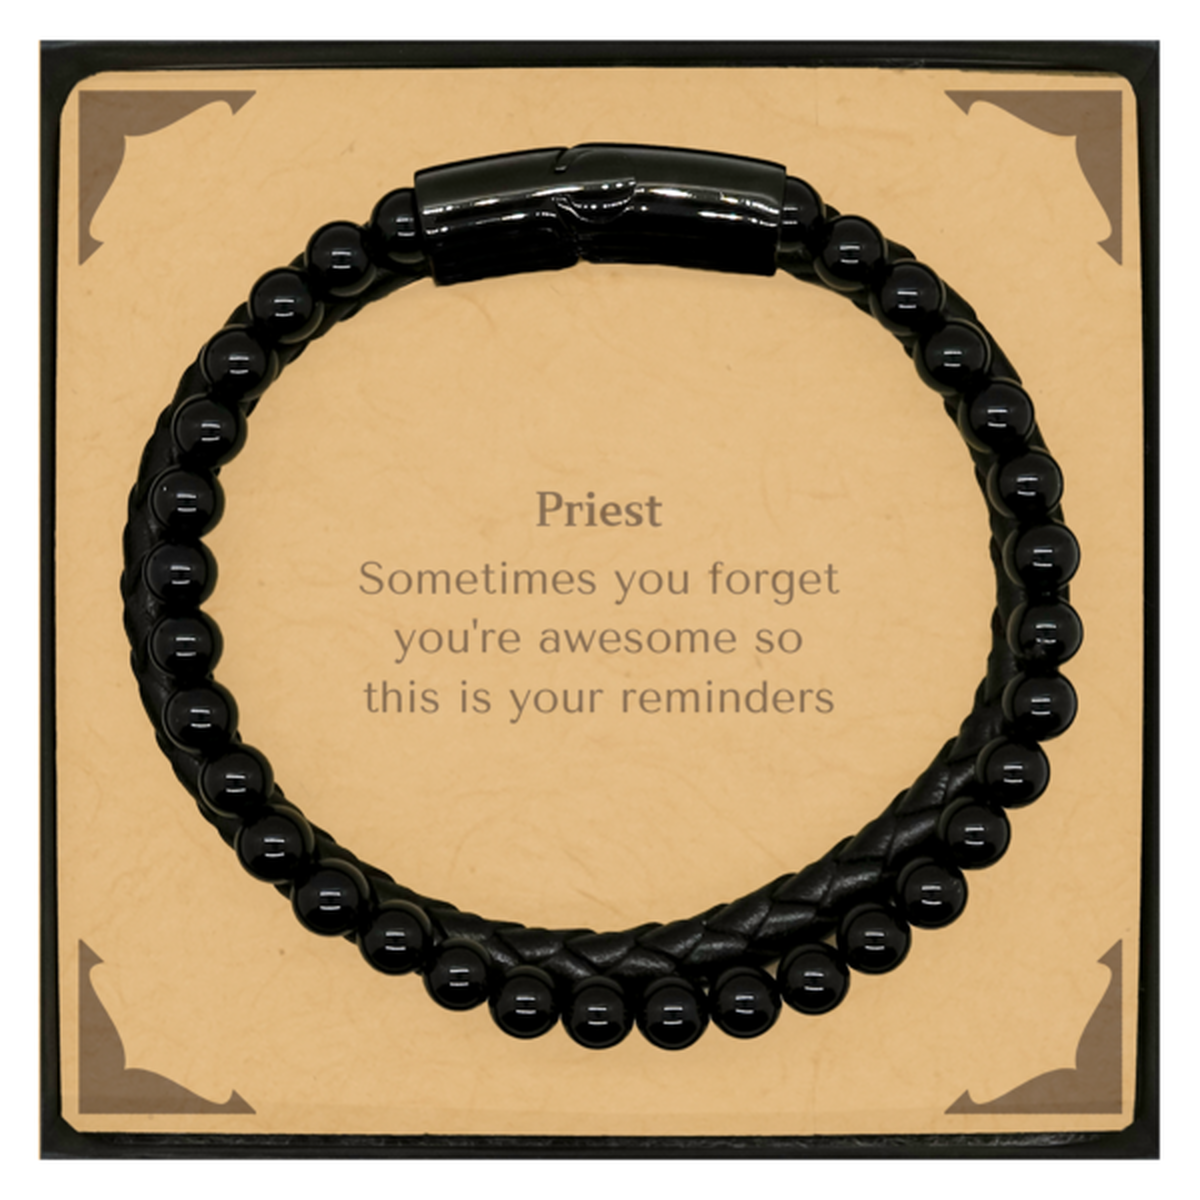 Sentimental Priest Stone Leather Bracelets, Priest Sometimes you forget you're awesome so this is your reminders, Graduation Christmas Birthday Gifts for Priest, Men, Women, Coworkers